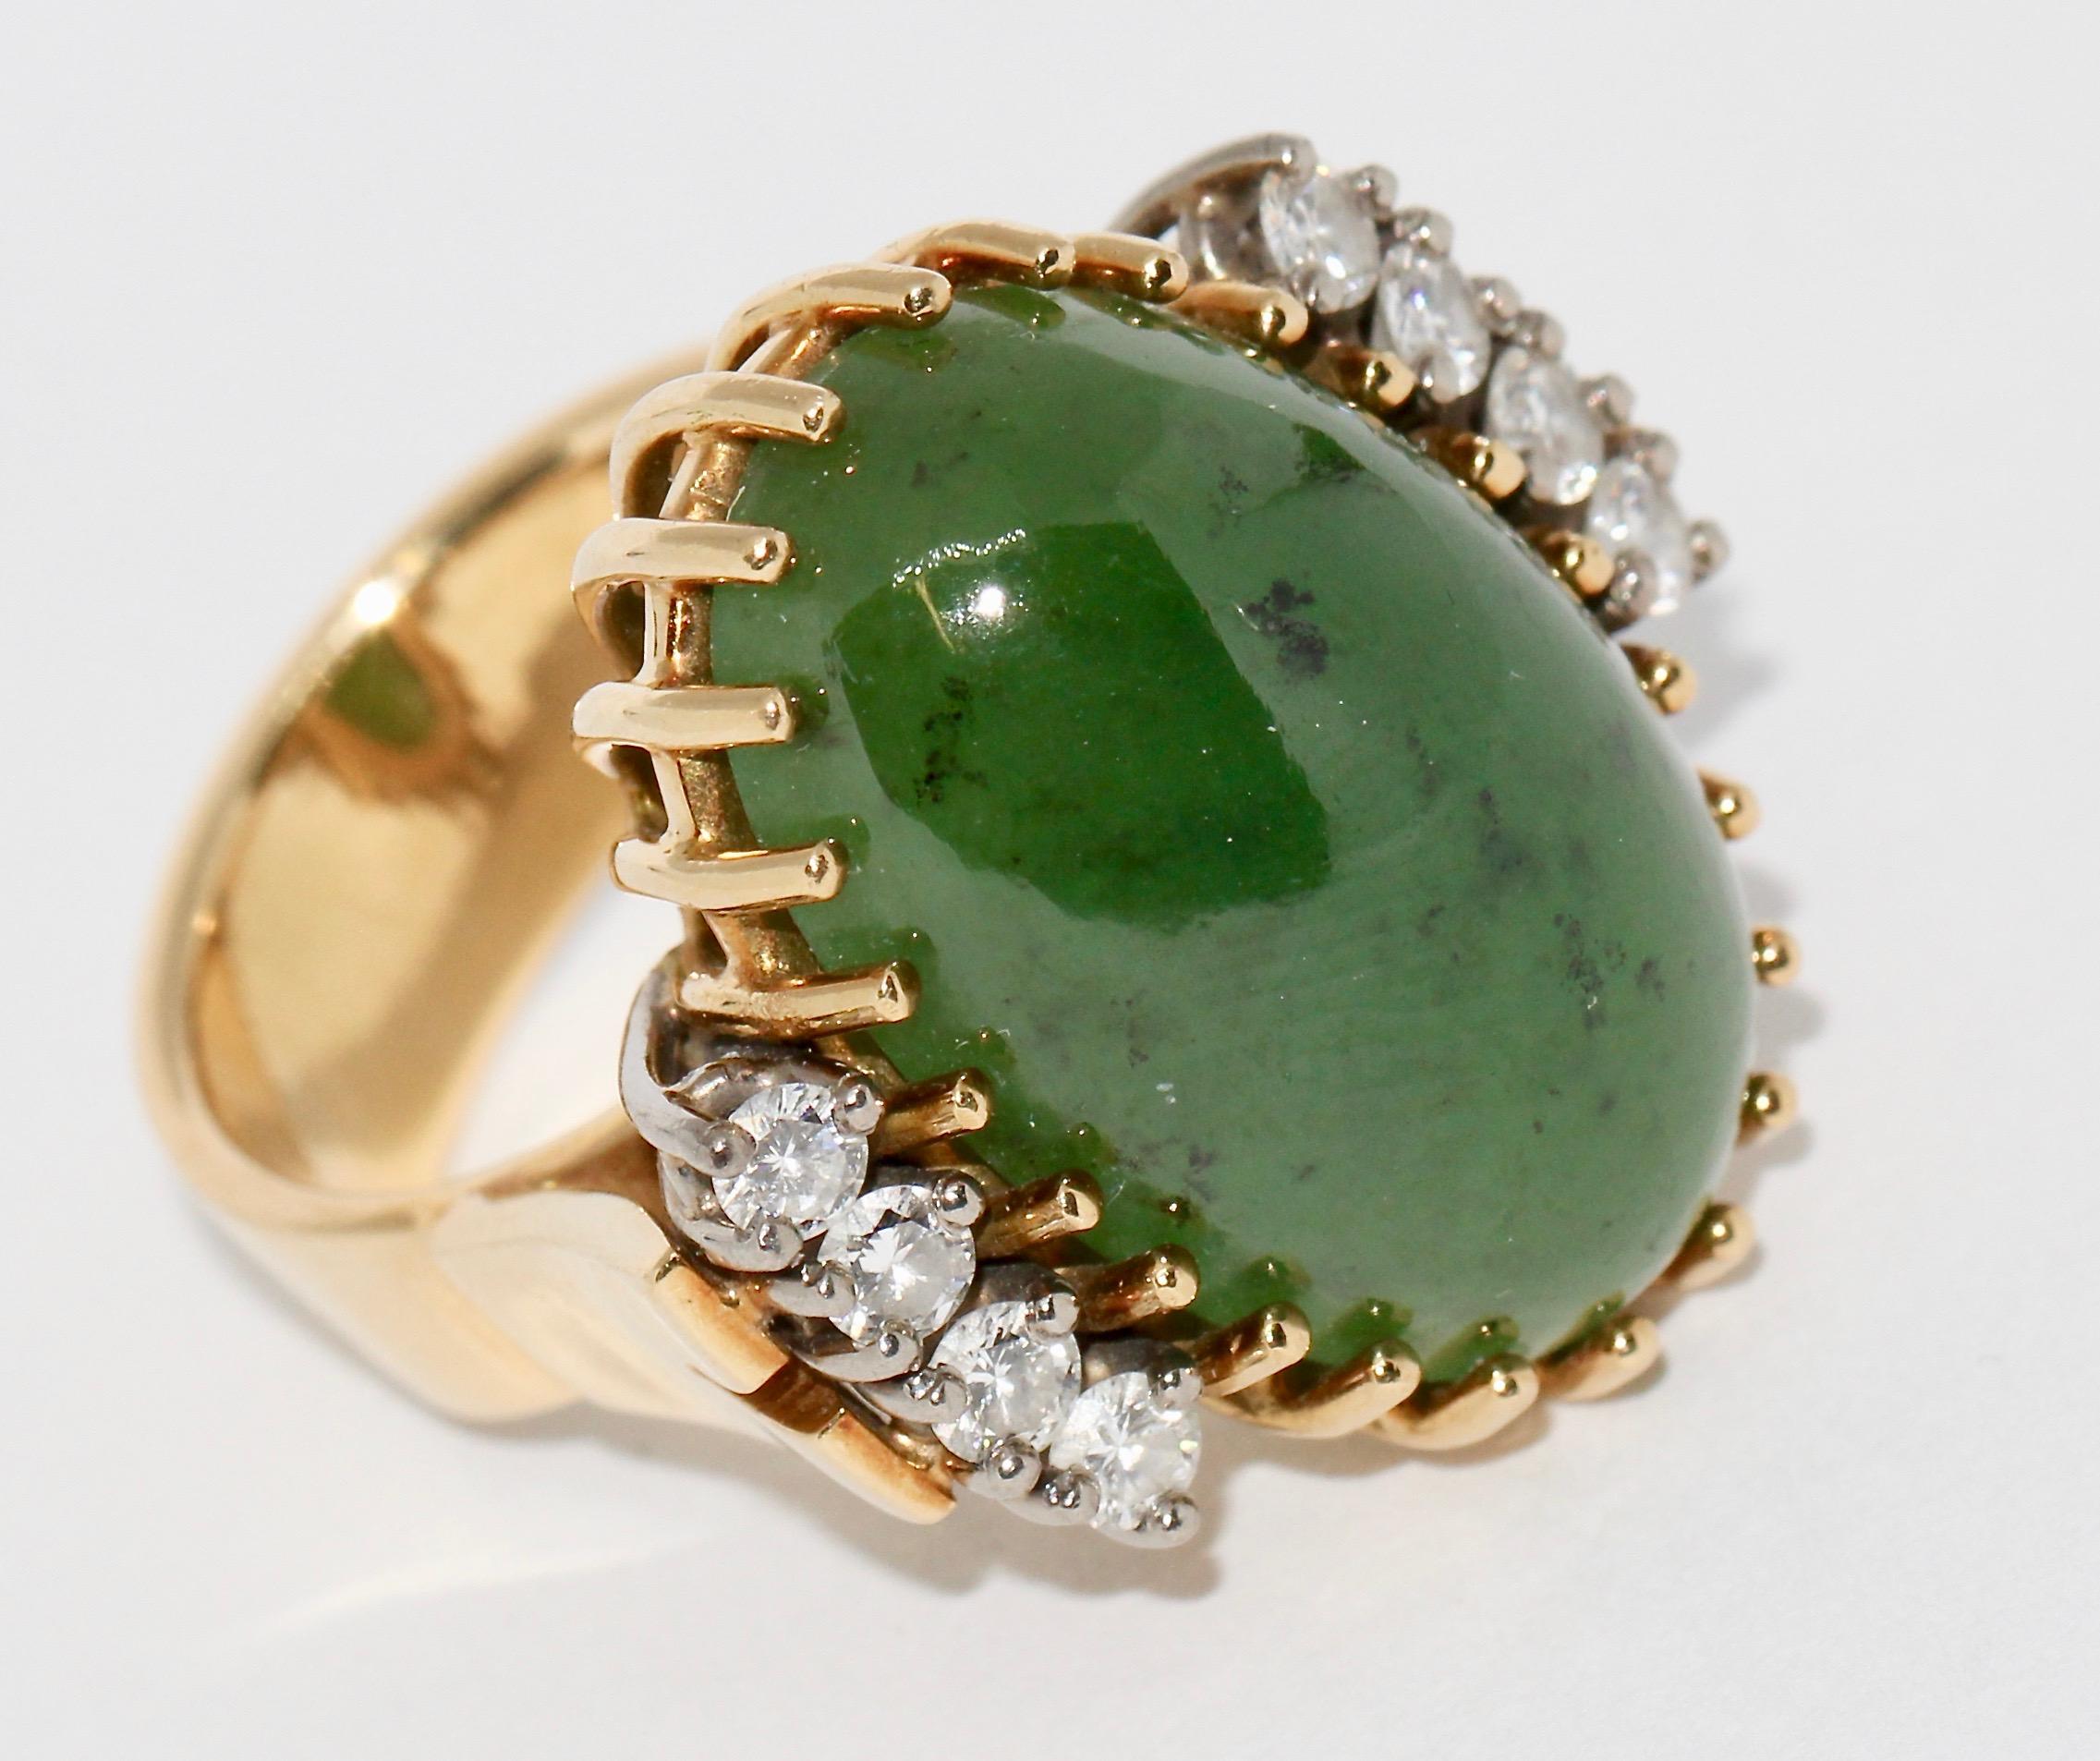 Beautiful Jade Ring, 18 Karat Gold with Diamonds.

The eight diamonds have a very good clarity and white color.
US Ring Size 5.7

You will find the matching necklace, bracelet and pendant in our other offers.